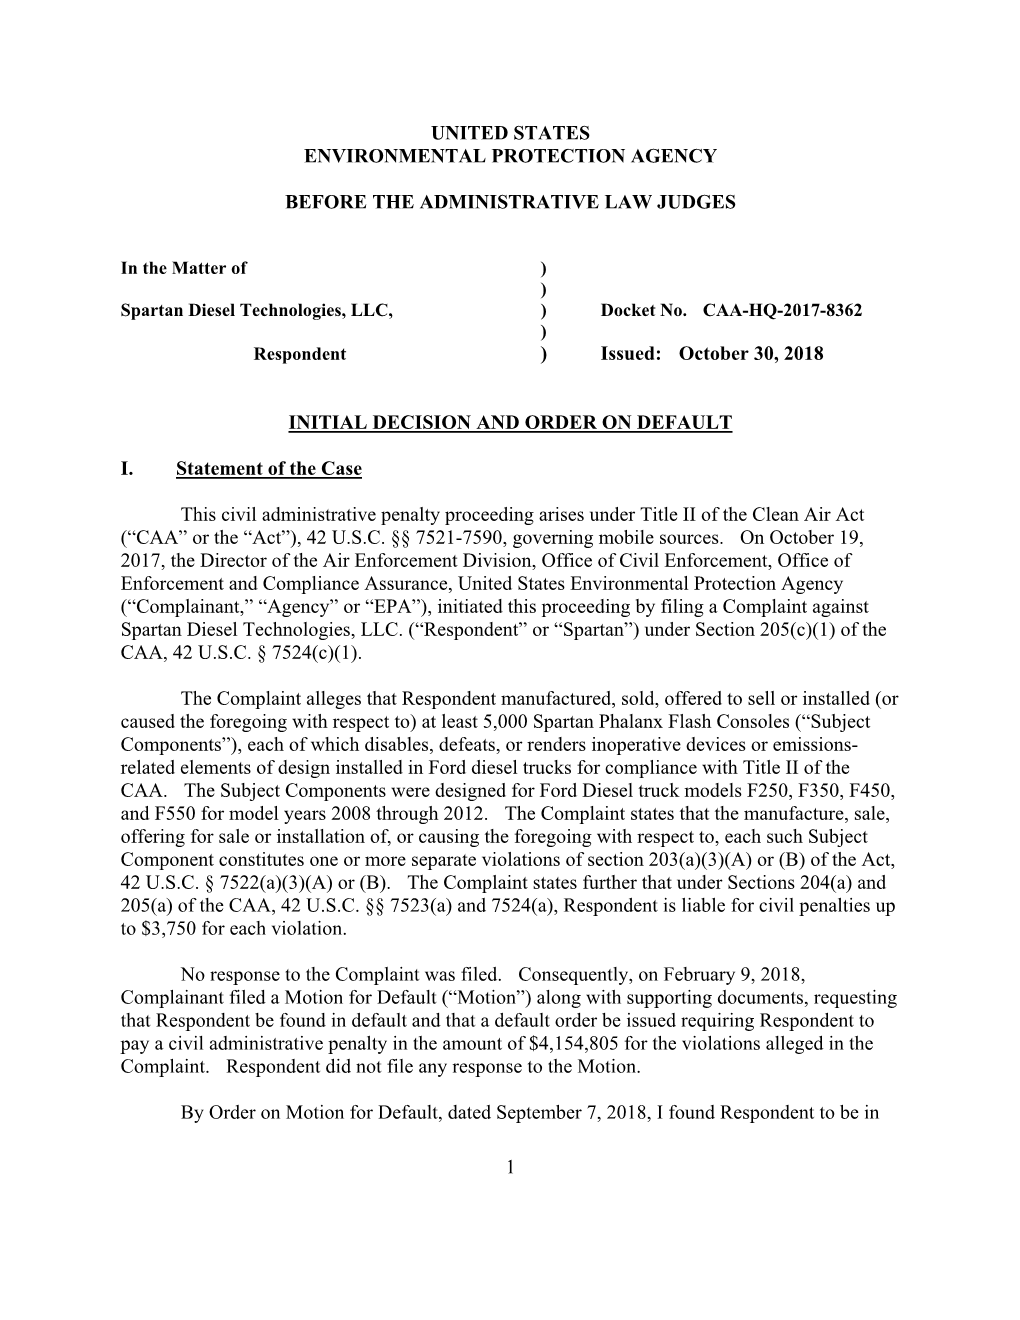 Spartan Diesel Technologies, LLC, INITIAL DECISION and ORDER on DEFAULT